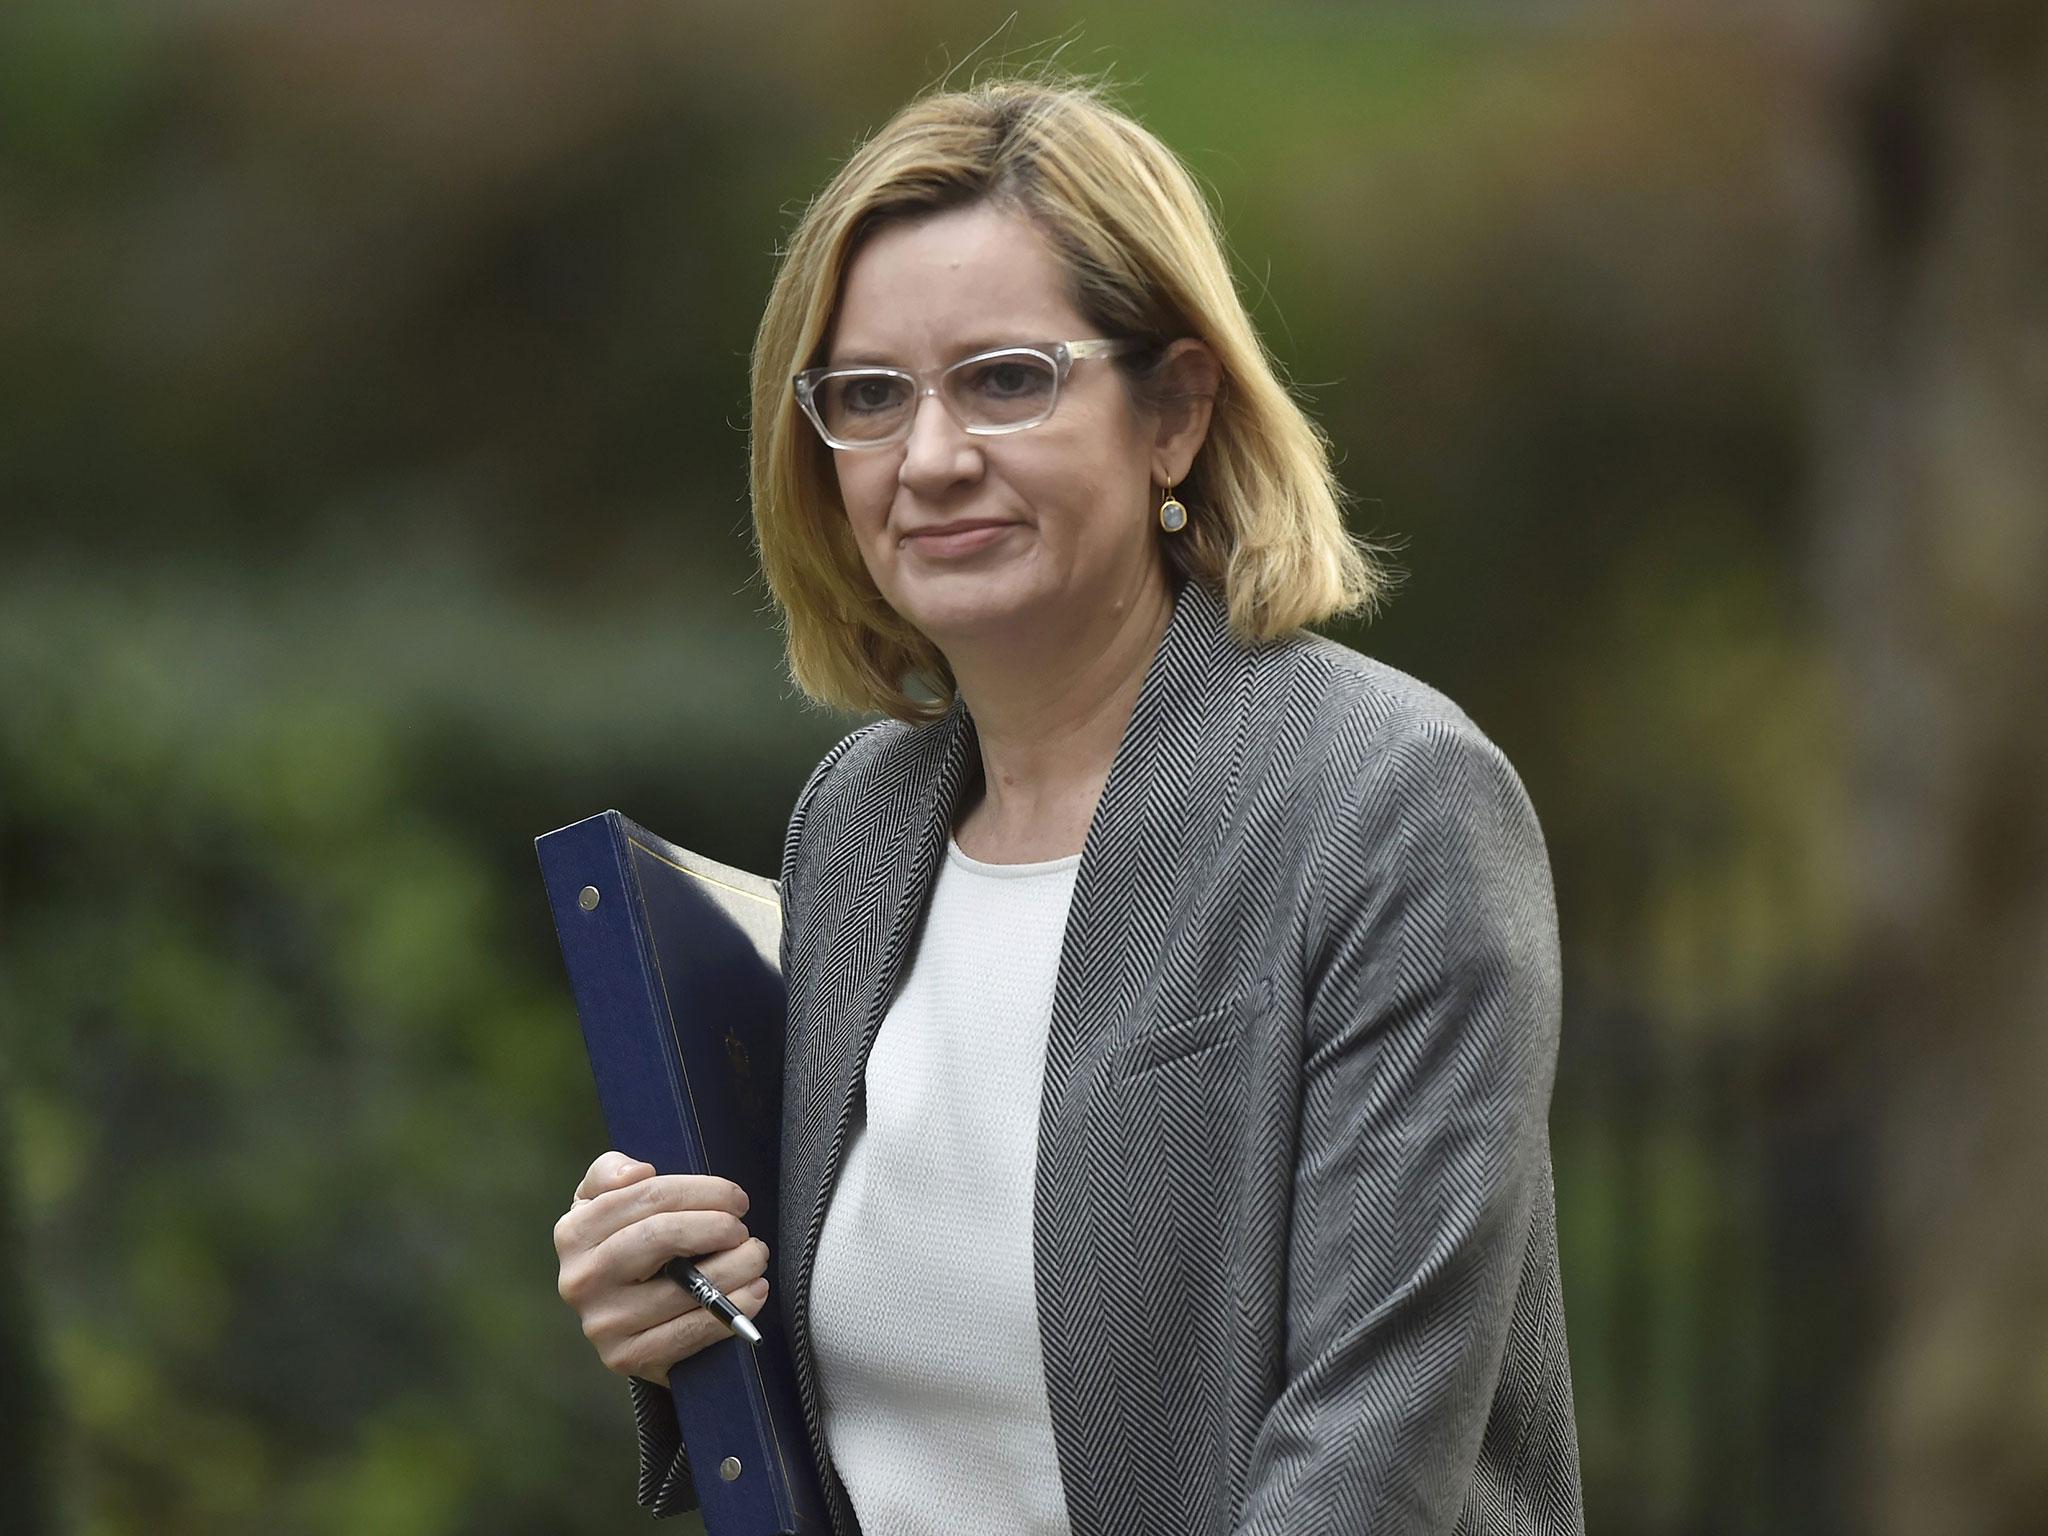 Amber Rudd filled in for Theresa May at the leaders' debate